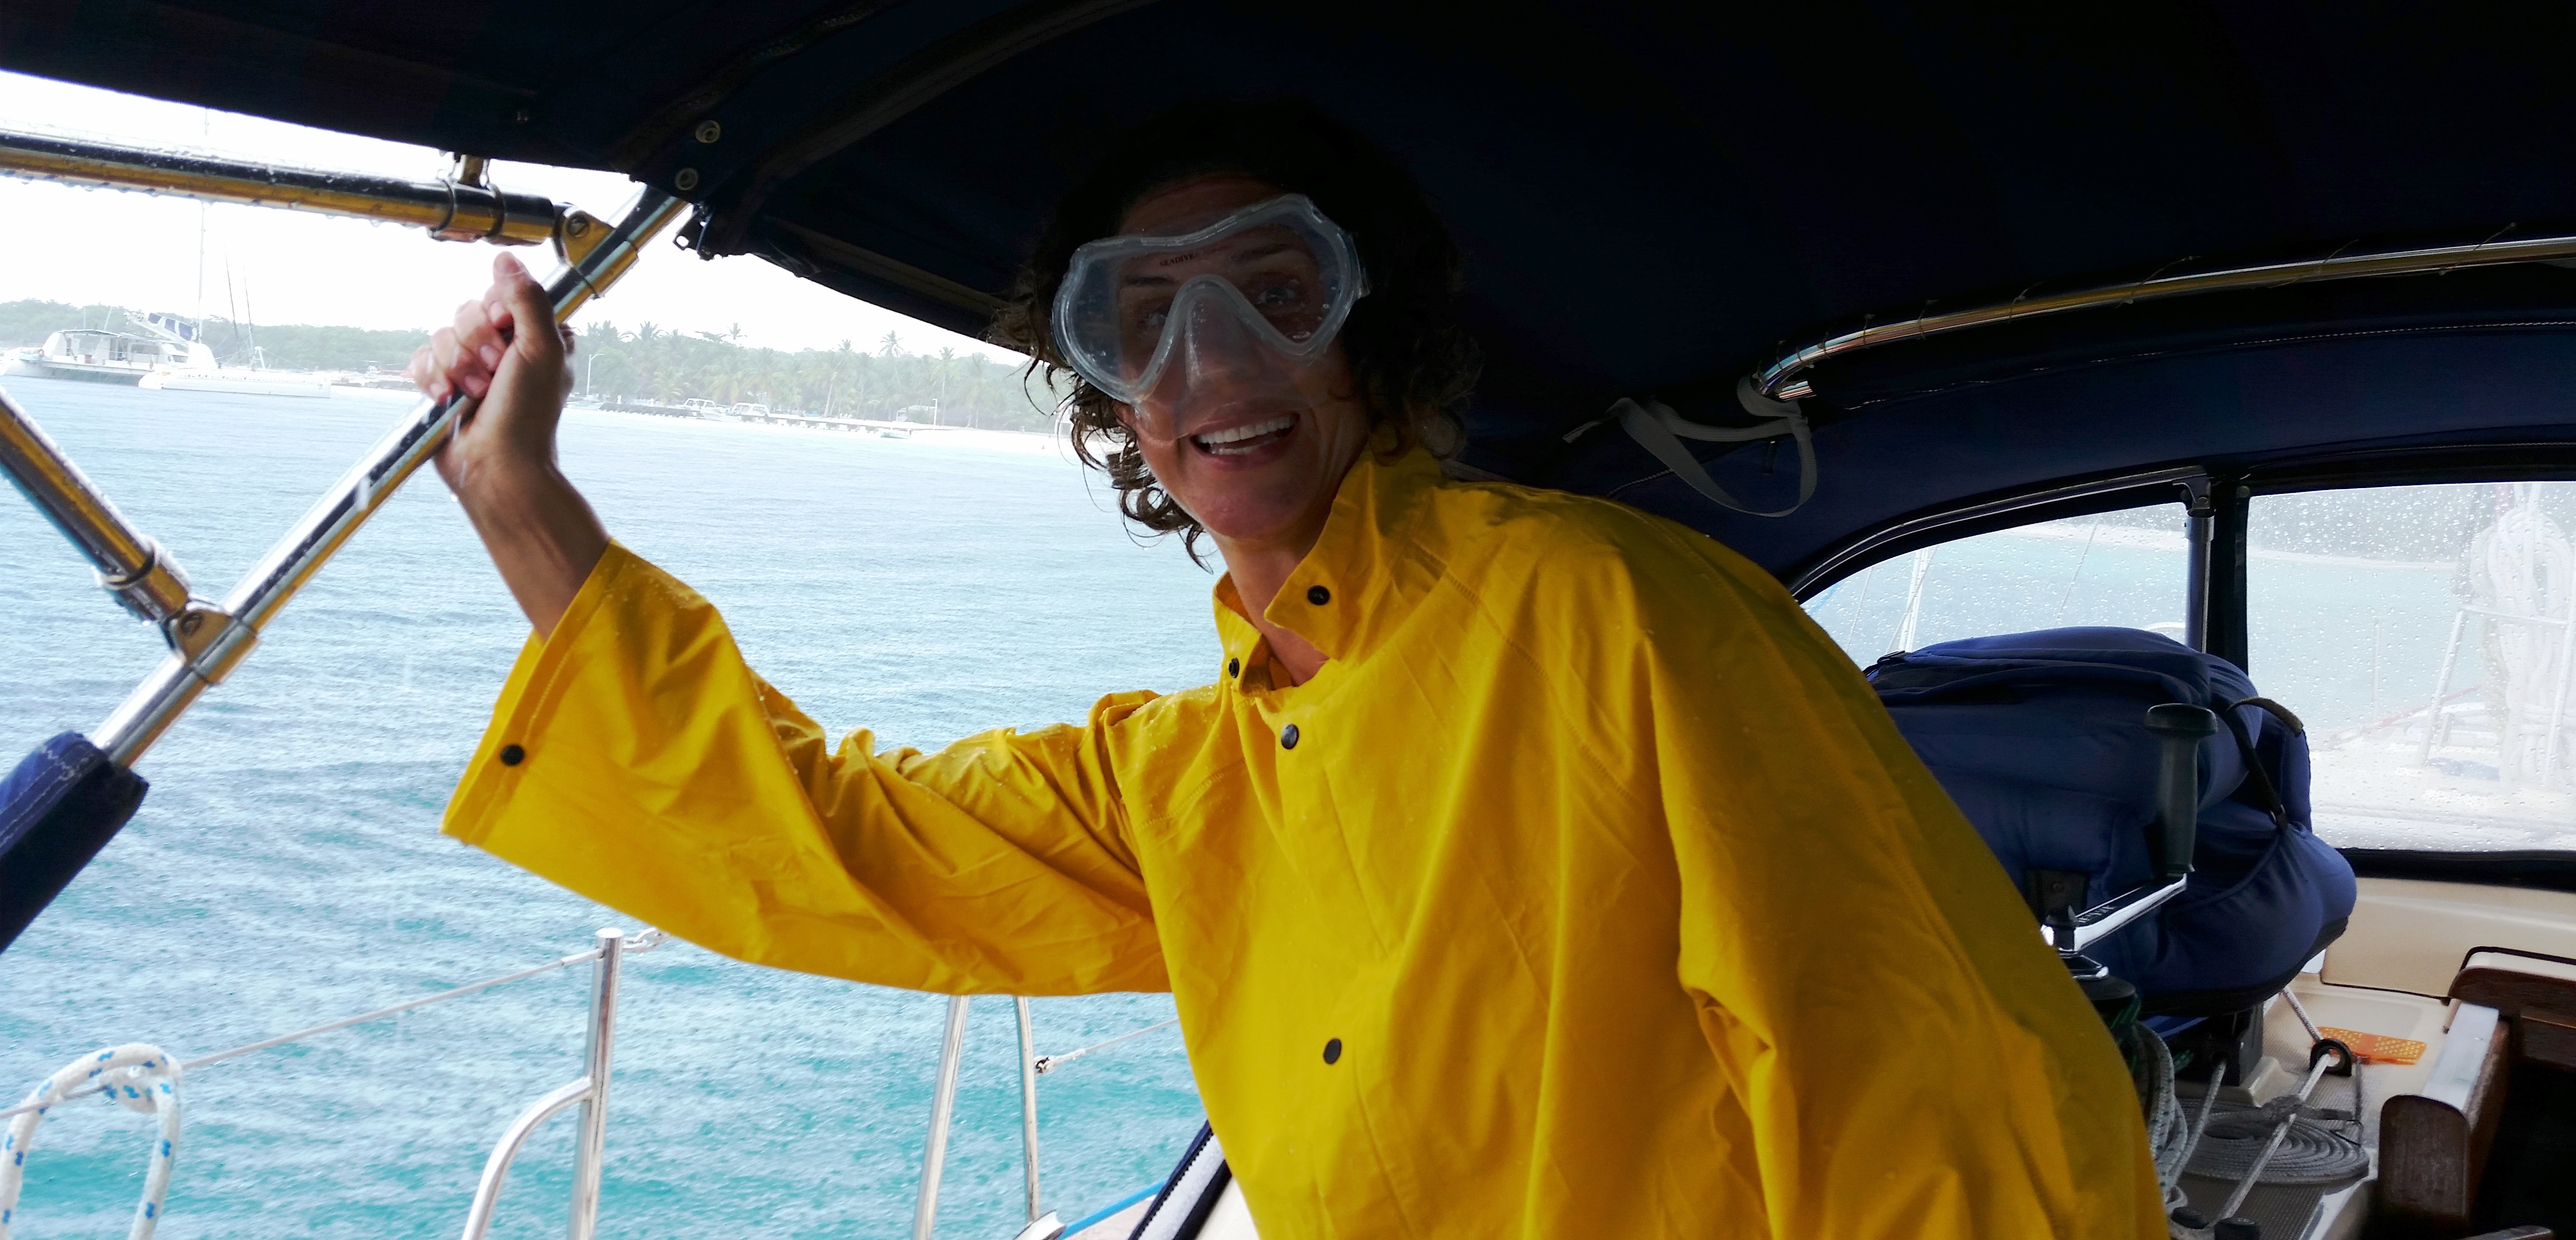 Finally arriving at the anchorage. After the worst of the storm, the rain was still blowing sideways so hard, I had to wear goggles to anchor Pura Vida